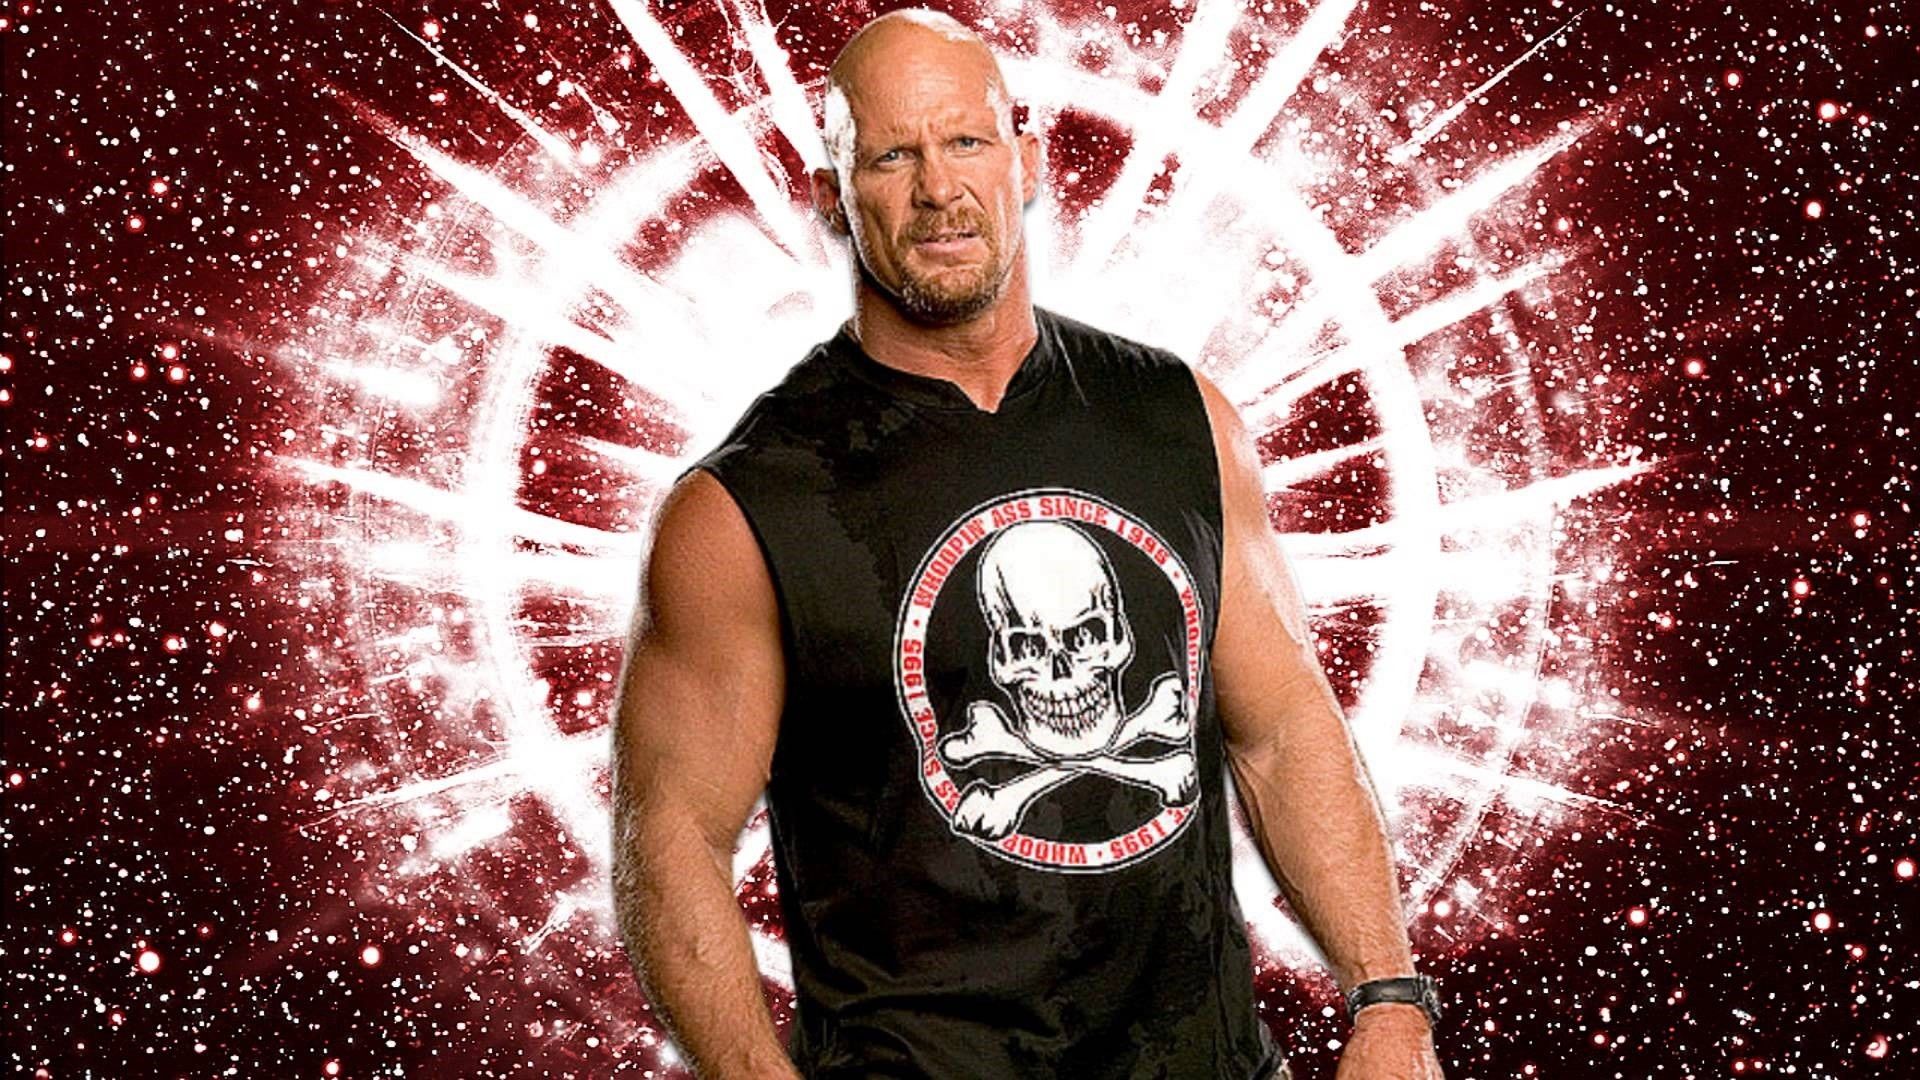 Stone Cold Logo Wallpapers - Wallpaper Cave.